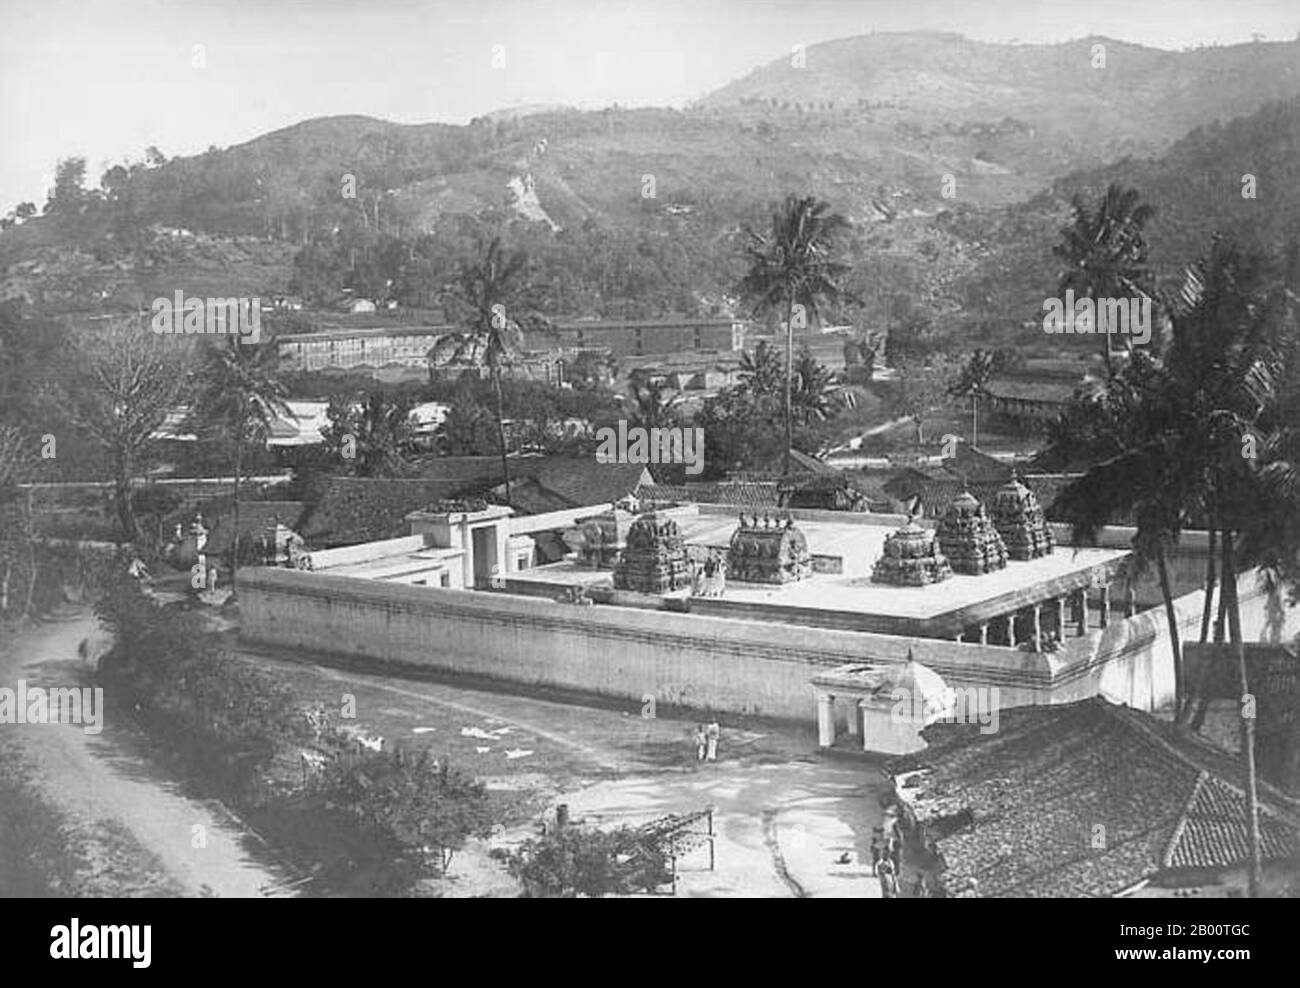 Sri Lanka: A Hindu temple in Kandy, c. 1880.  In 1592 Kandy became the capital city of the last remaining independent kingdom in Sri Lanka after the coastal regions had been conquered by the Portuguese.  Kandy stayed independent until the early 19th century. In the Second Kandyan War, the British met no resistance and reached the city on February 10, 1815. On March 2, 1815, a treaty known as the Kandyan Convention was signed between the British and the Radalas (Kandyan aristocrats). With this treaty, Kandy recognized the King of England as its King and became a British protectorate. Stock Photo